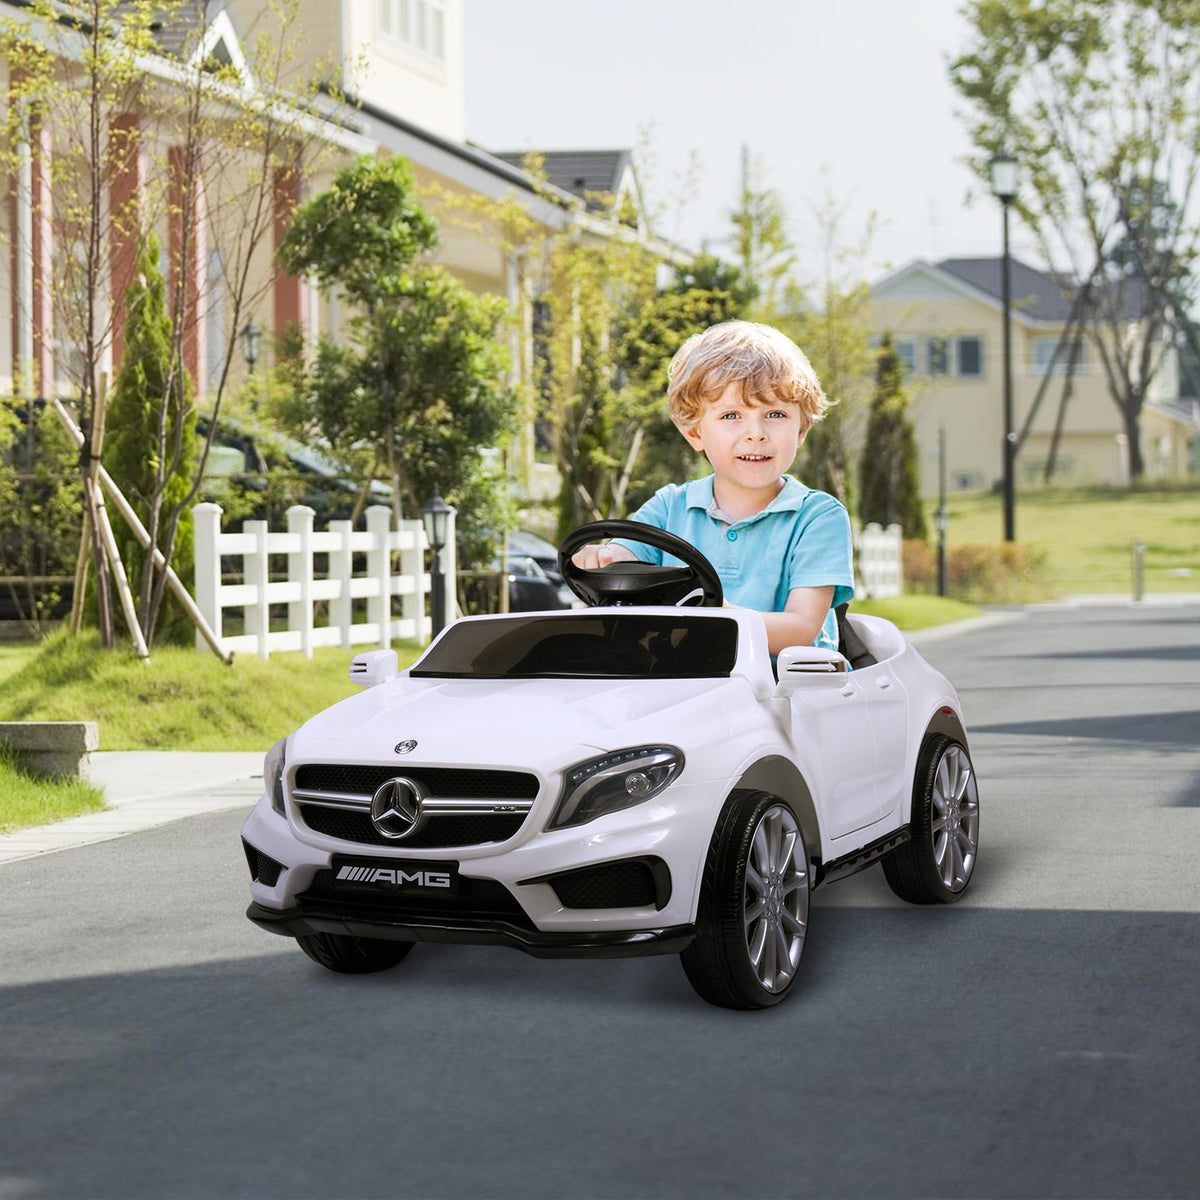 6V Kid Ride on Car Electric Vehicle with Parental Remote Control, MP3 Player, Headlights (White)